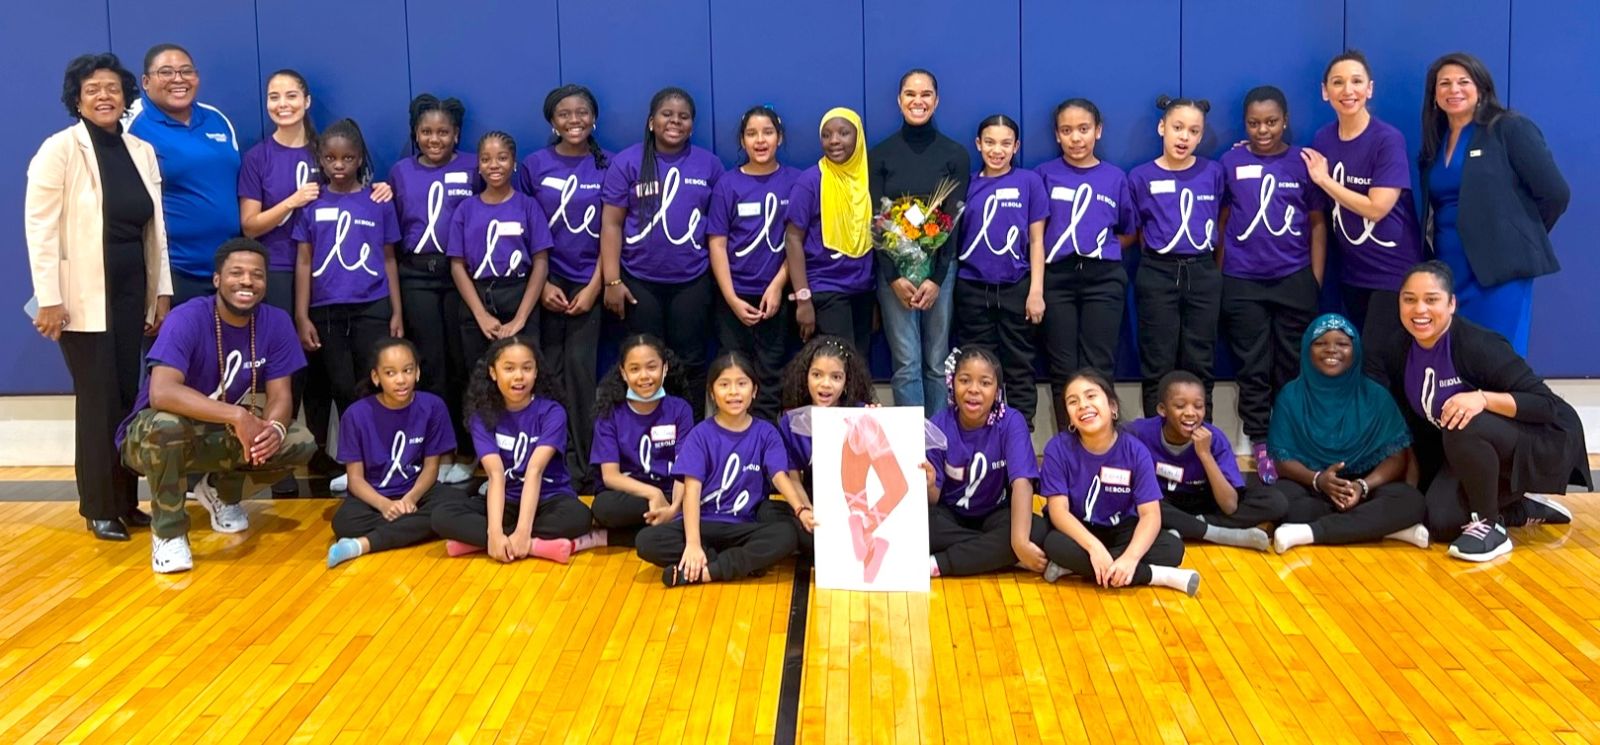 Misty Copeland with BE BOLD students, teaching artists, and representatives from the Bronxworks: Carolyn McLaughlin Community Center.